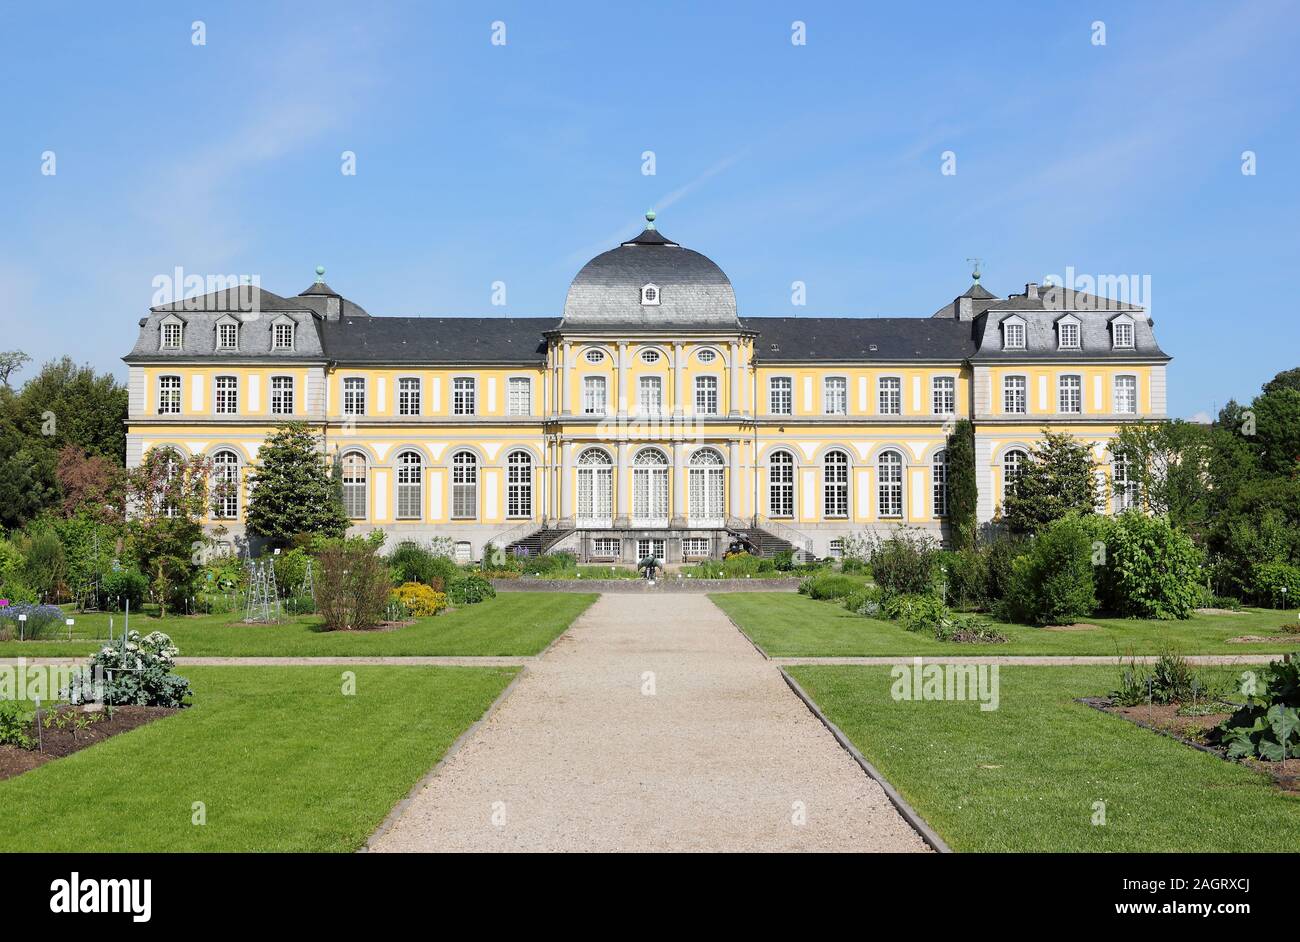 Poppelsdorf Palace in Bonn. It was constructed from 1715 till 1746, under design by the Frenchman Robert de Cotte. Stock Photo